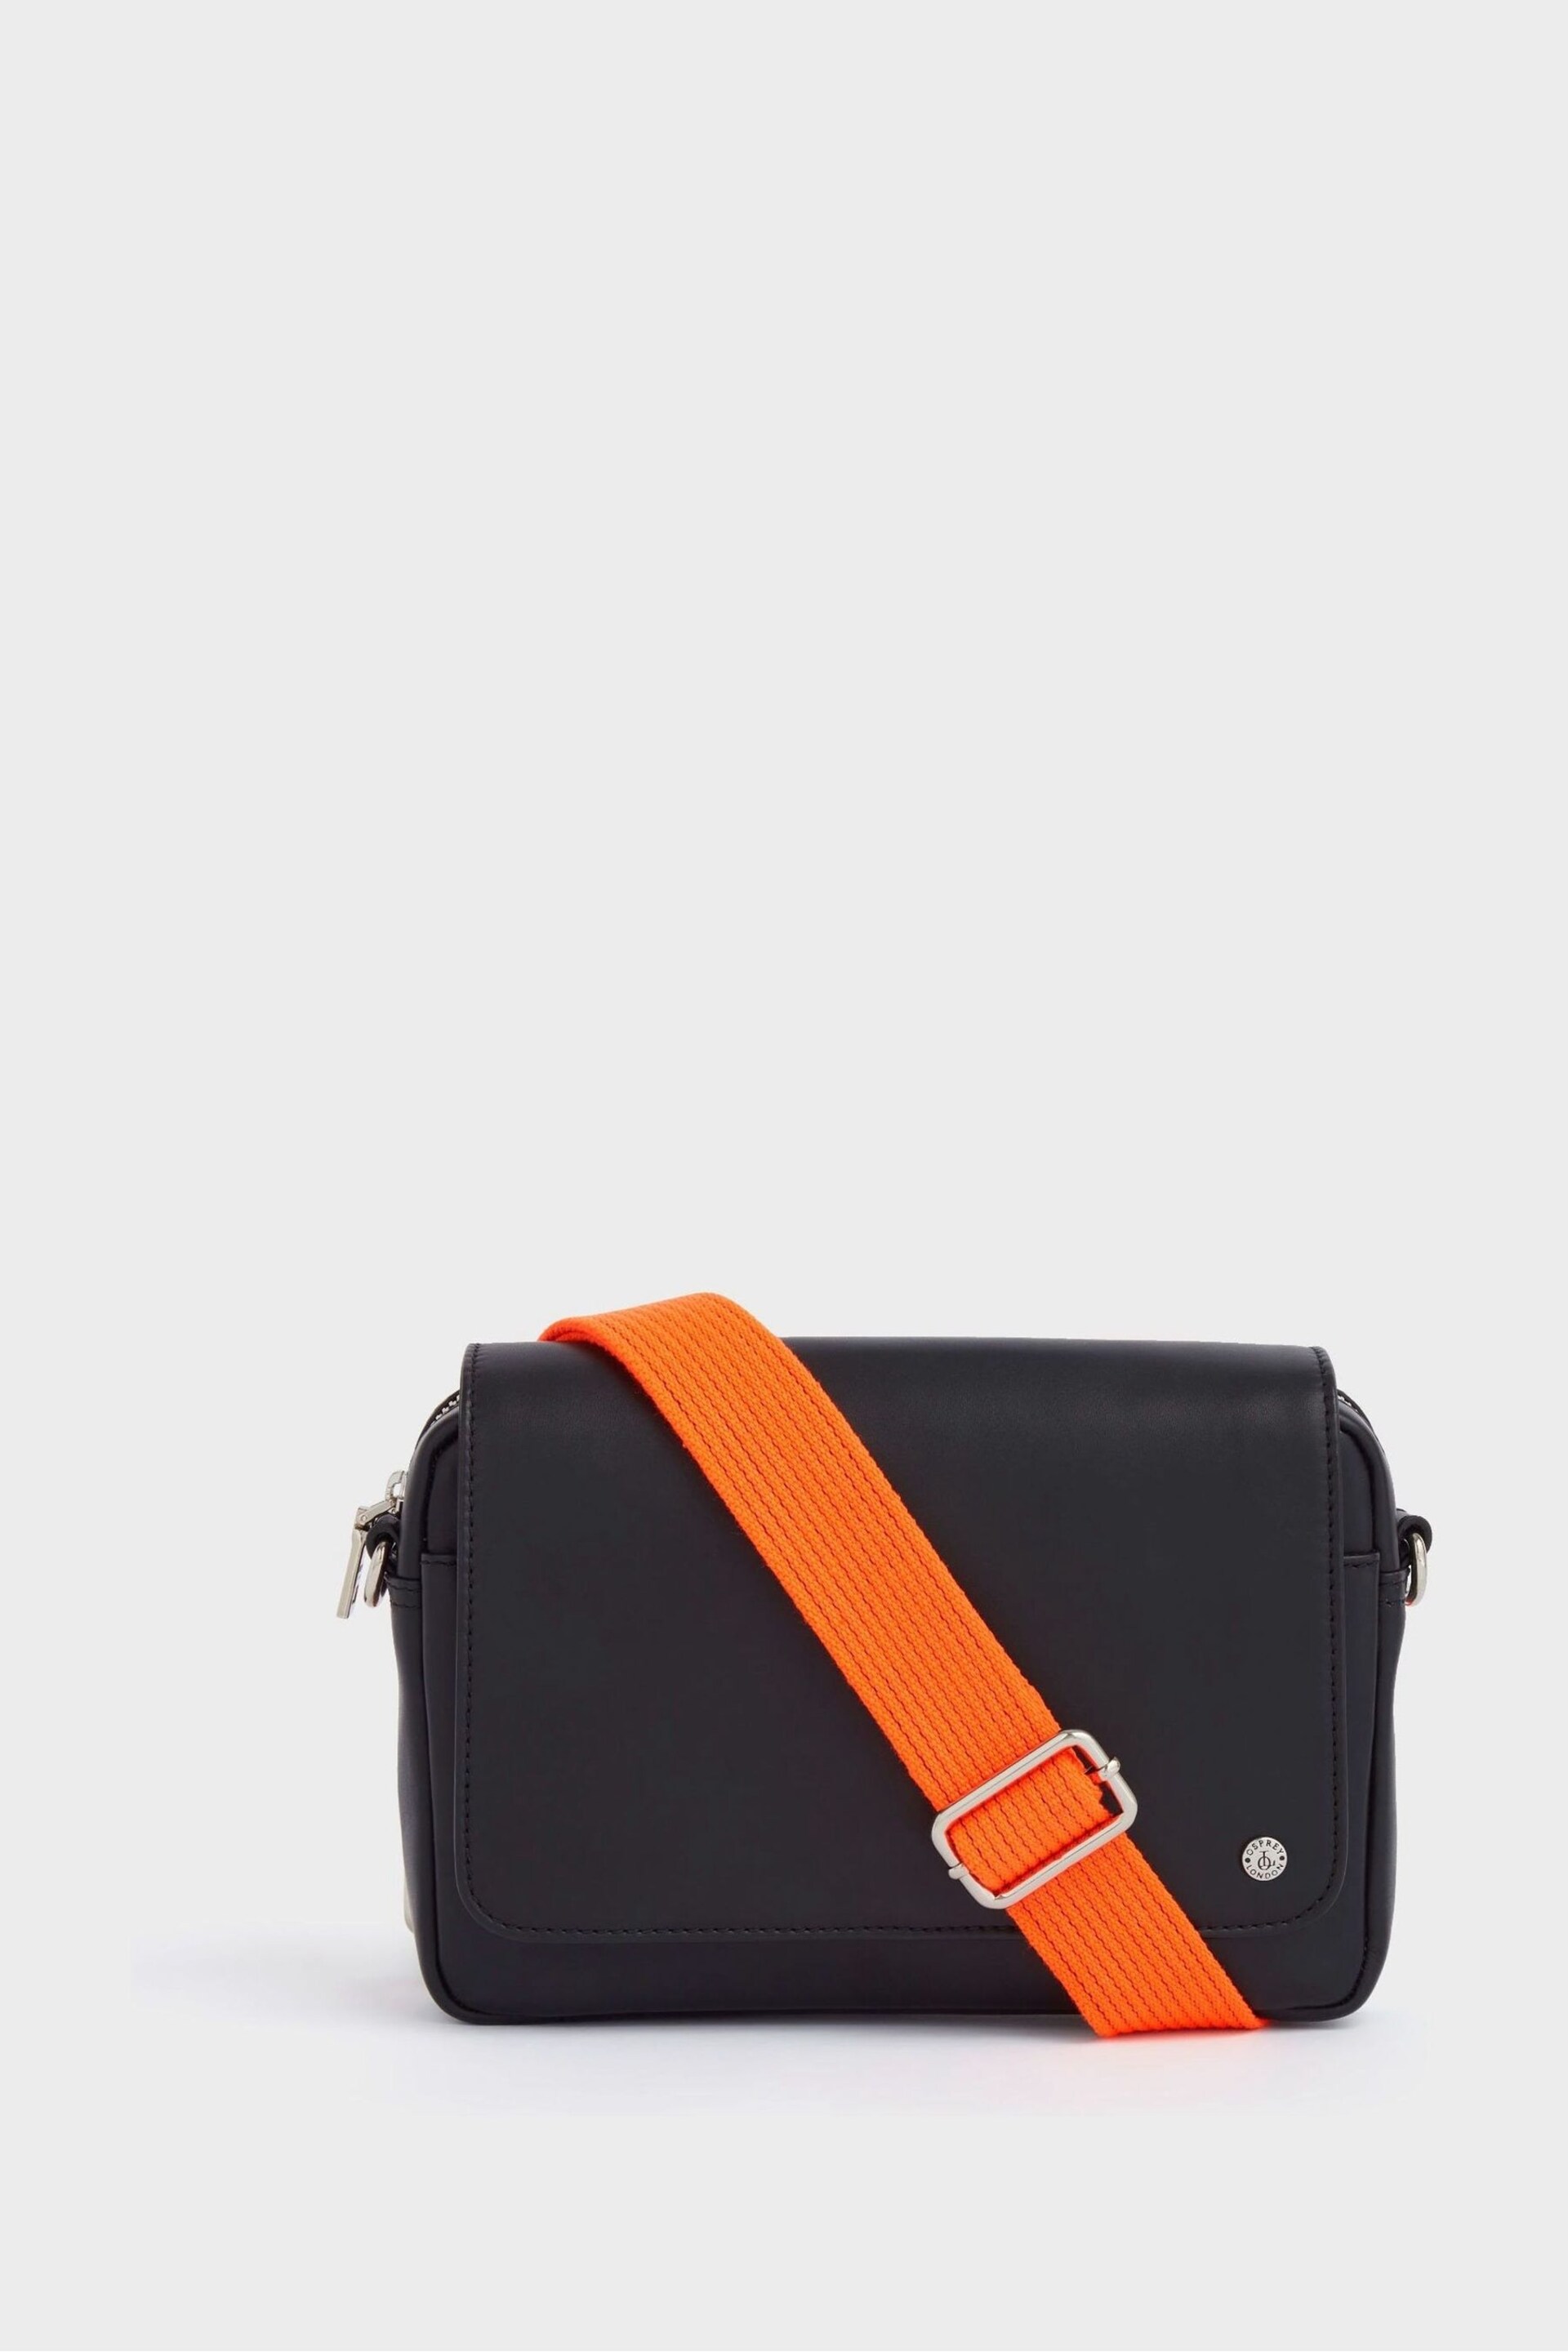 OSPREY LONDON The Hoxton Leather Cross-Body Black Bag - Image 1 of 7